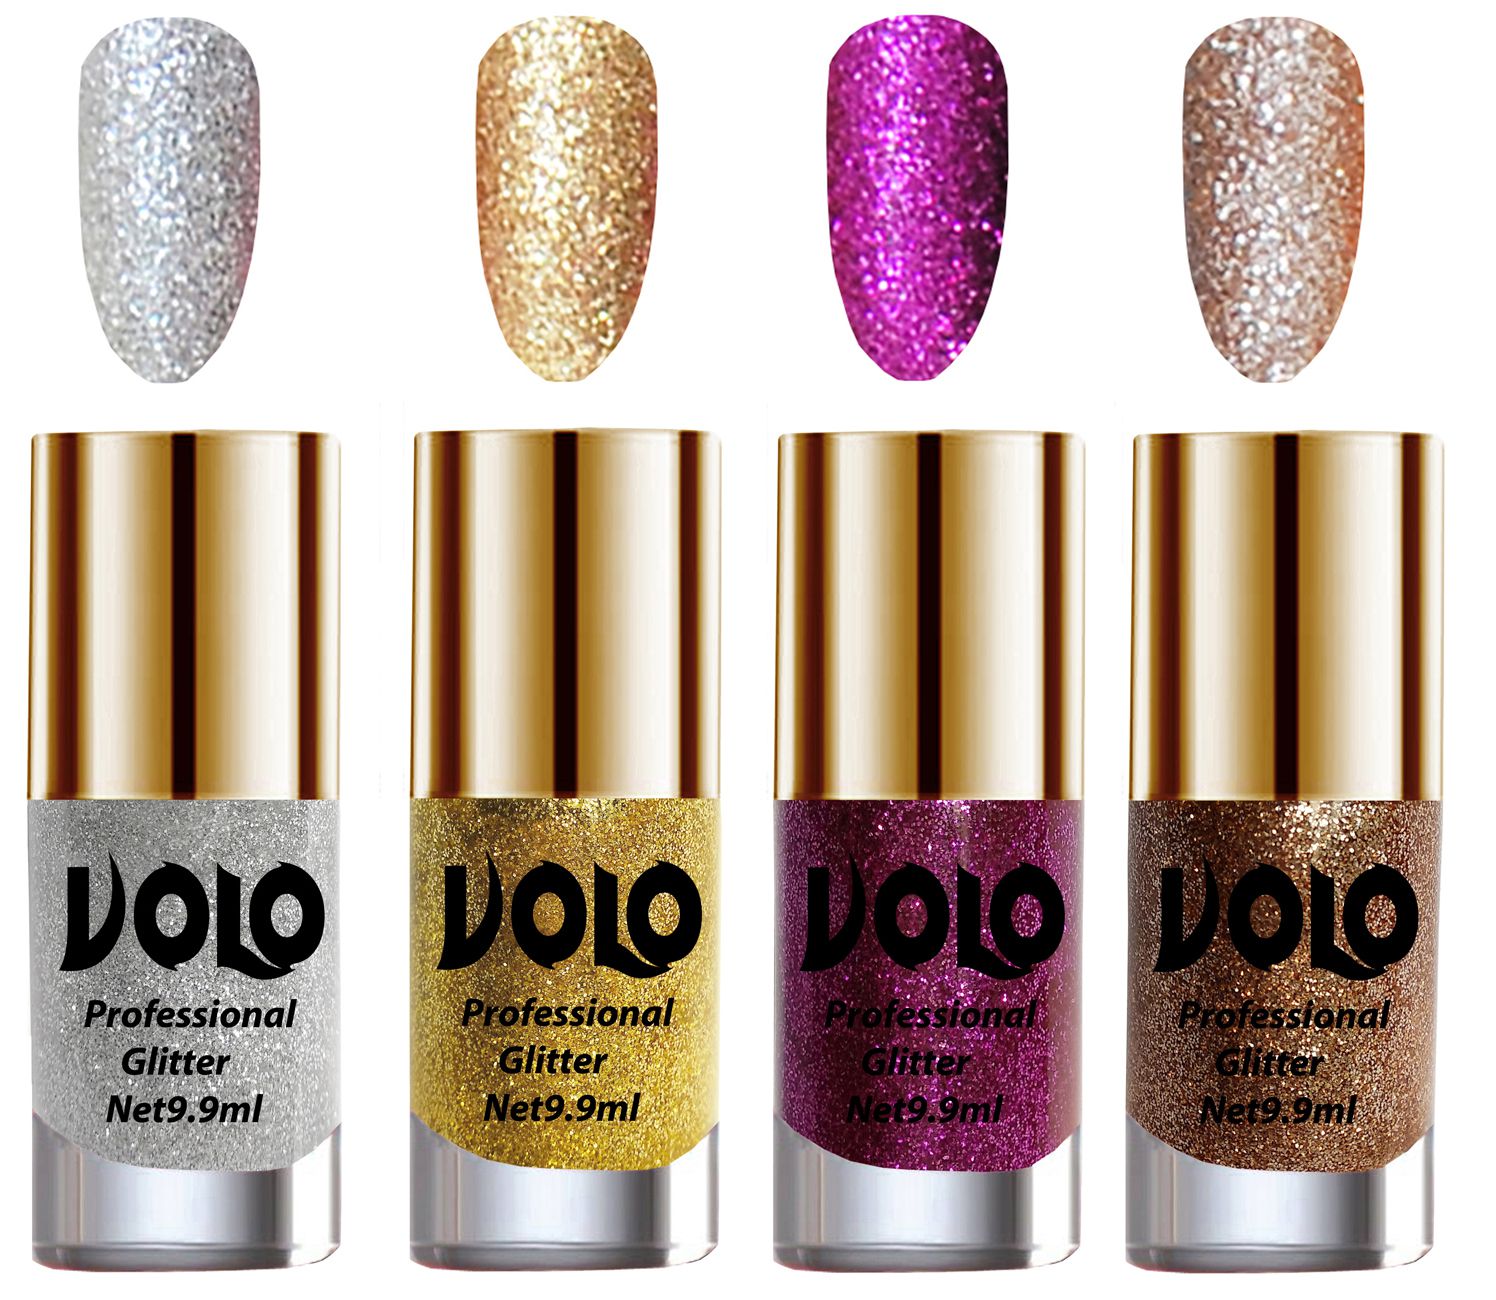     			VOLO Professionally Used Glitter Shine Nail Polish Silver,Gold,Purple Gold Pack of 4 39 mL